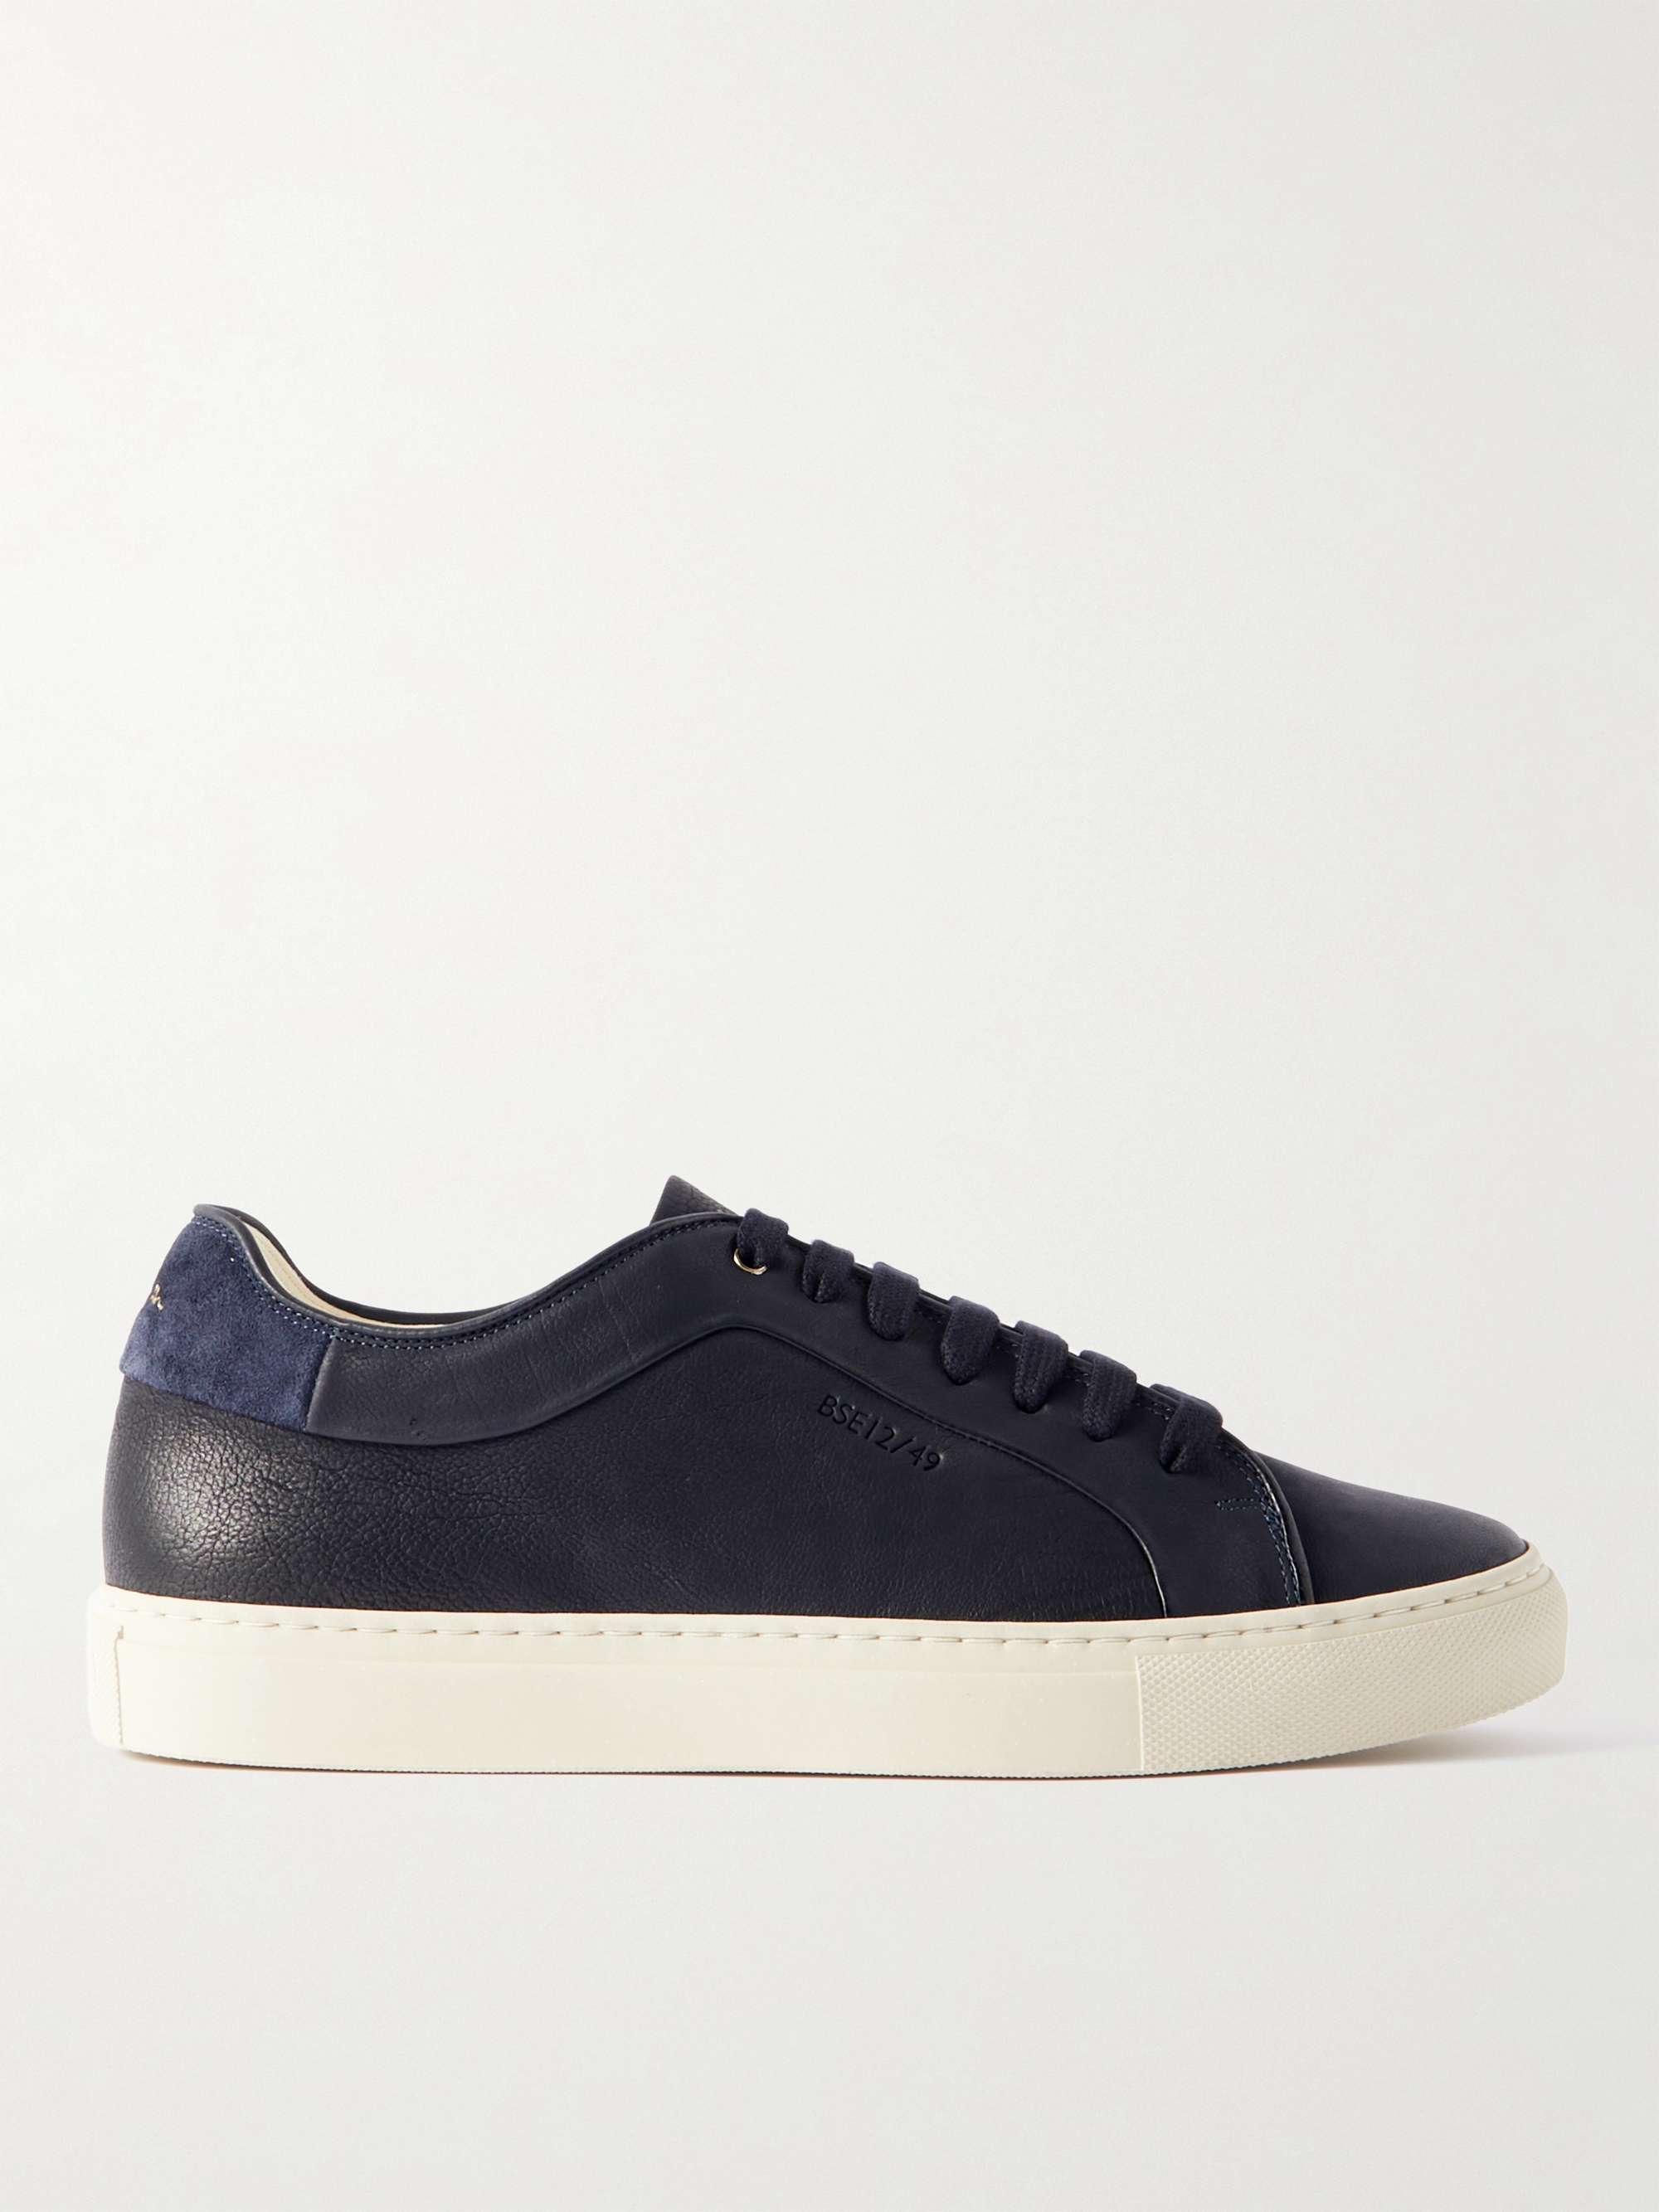 PAUL SMITH Tyrone Leather-Trimmed Suede Sneakers | MR PORTER